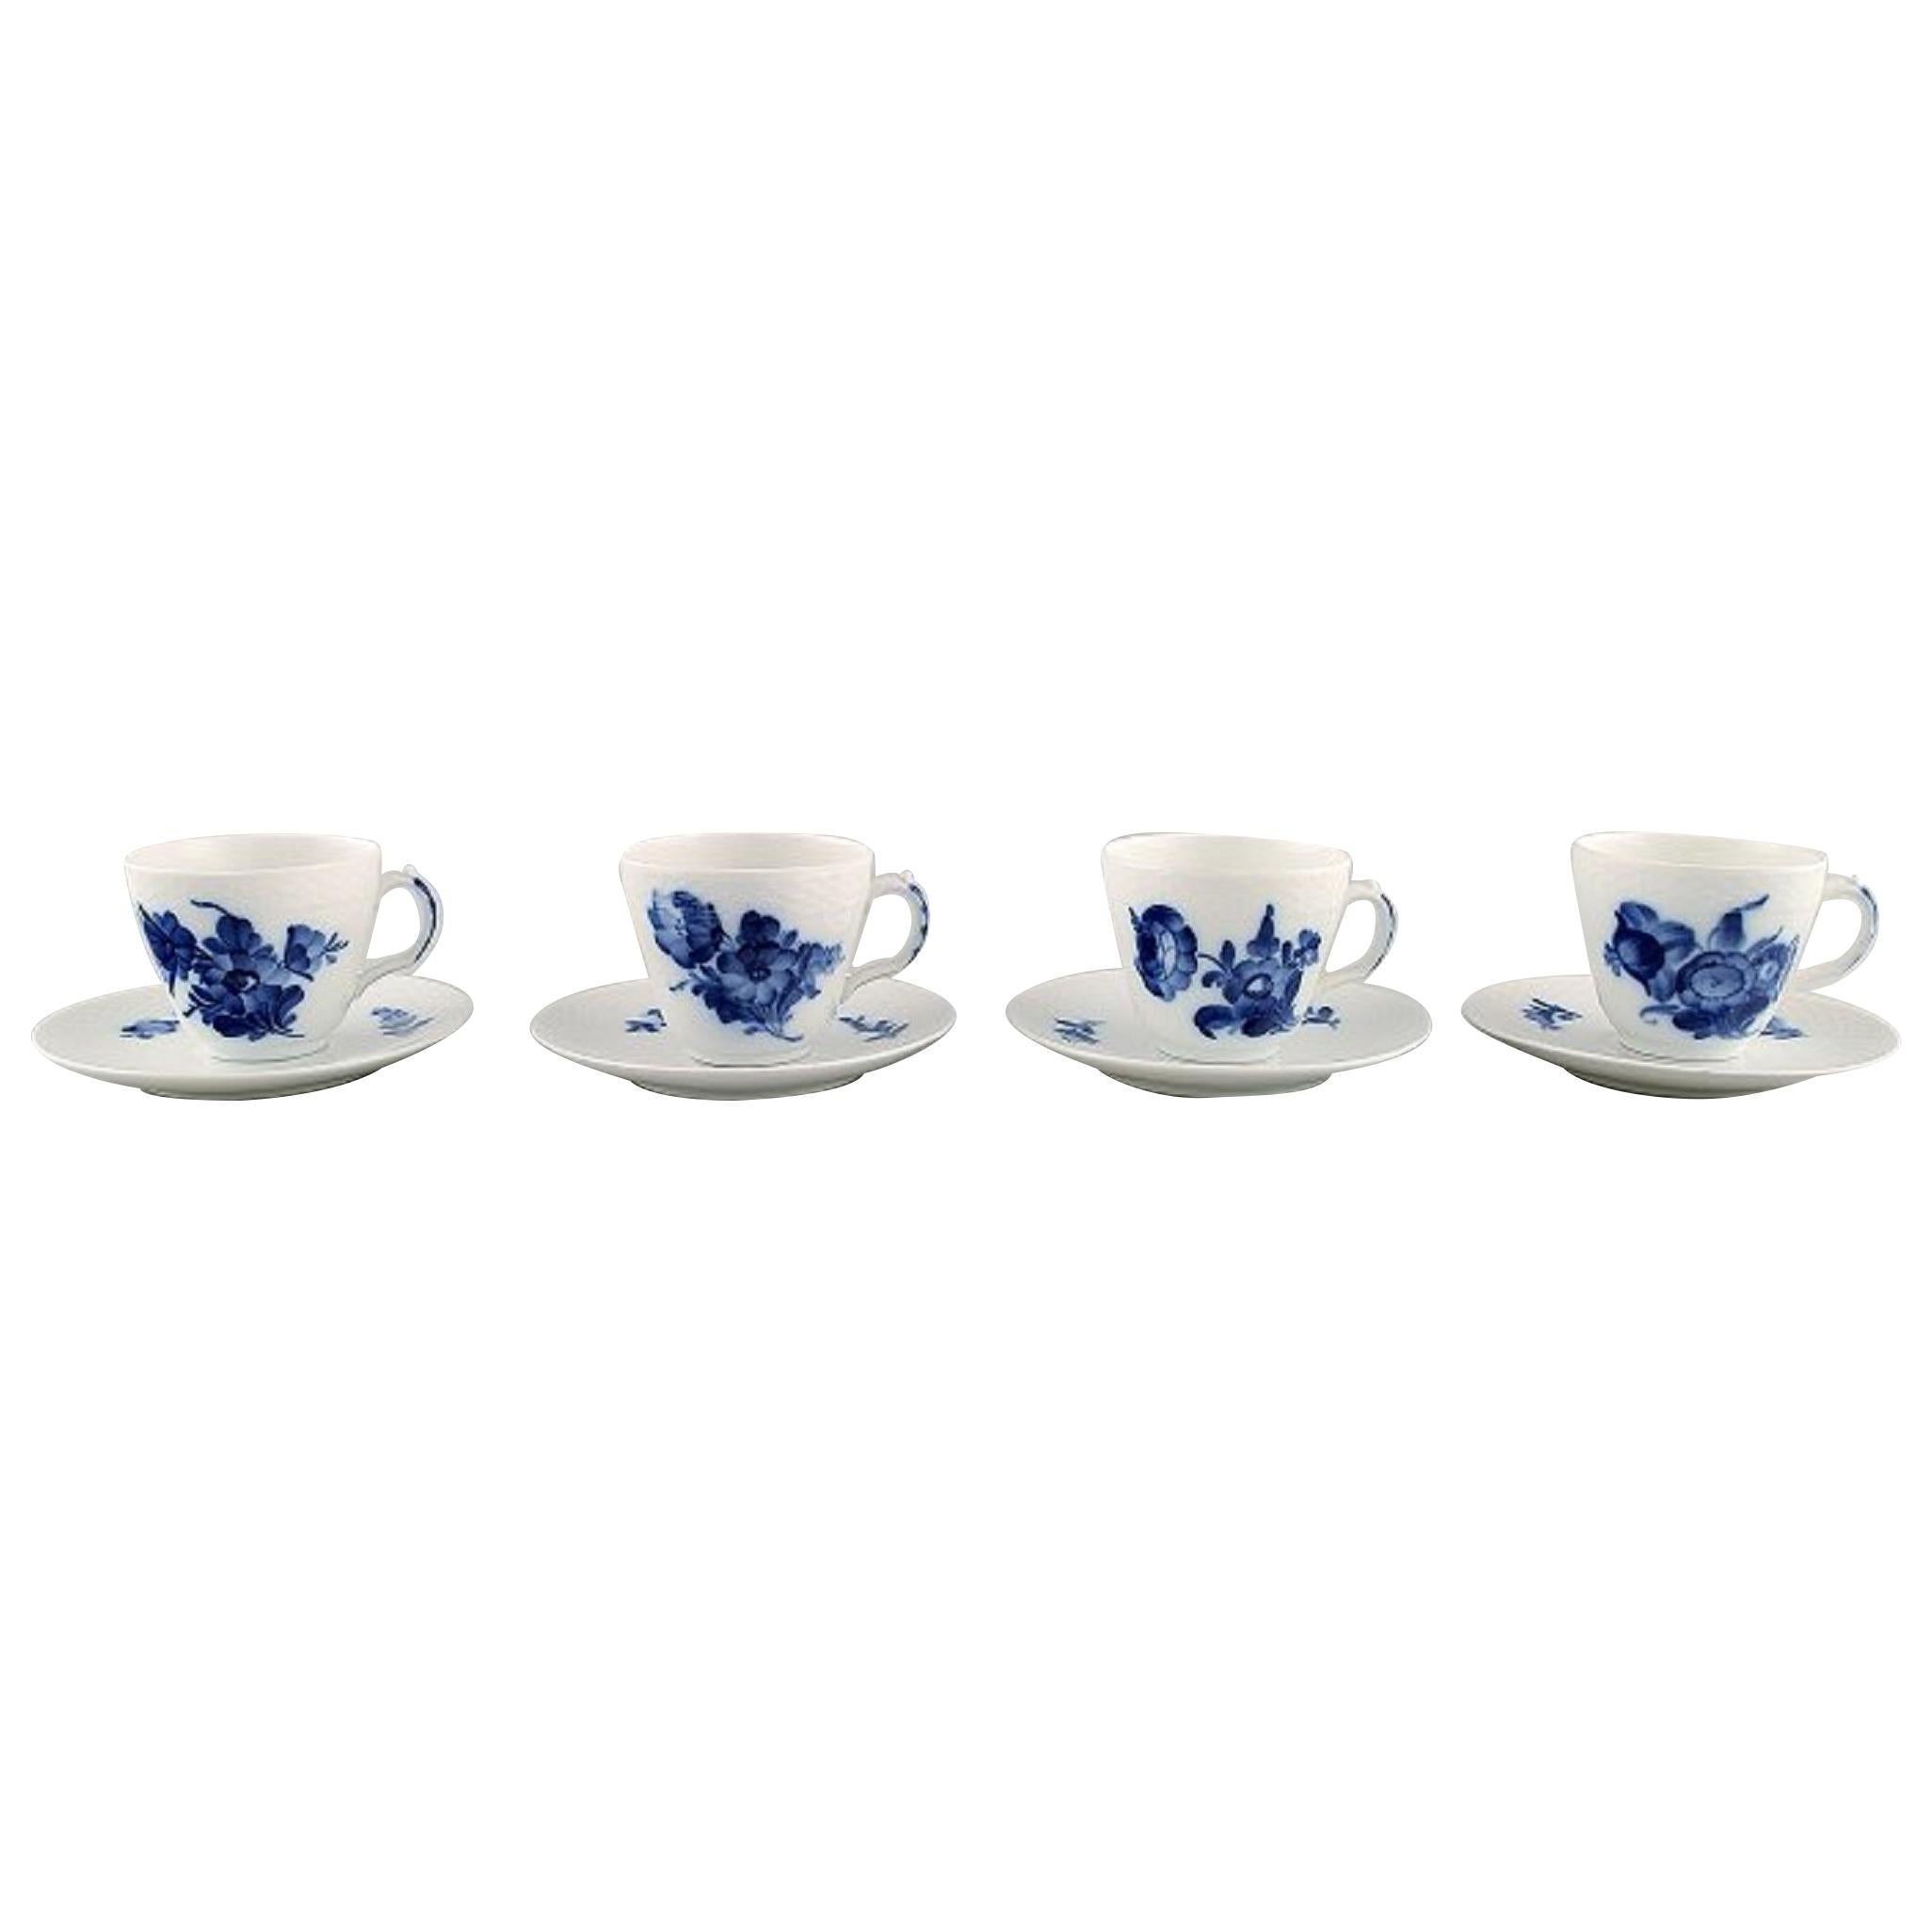 4 Sets of Royal Copenhagen Blue Flower Braided, Espresso Cup and Saucer